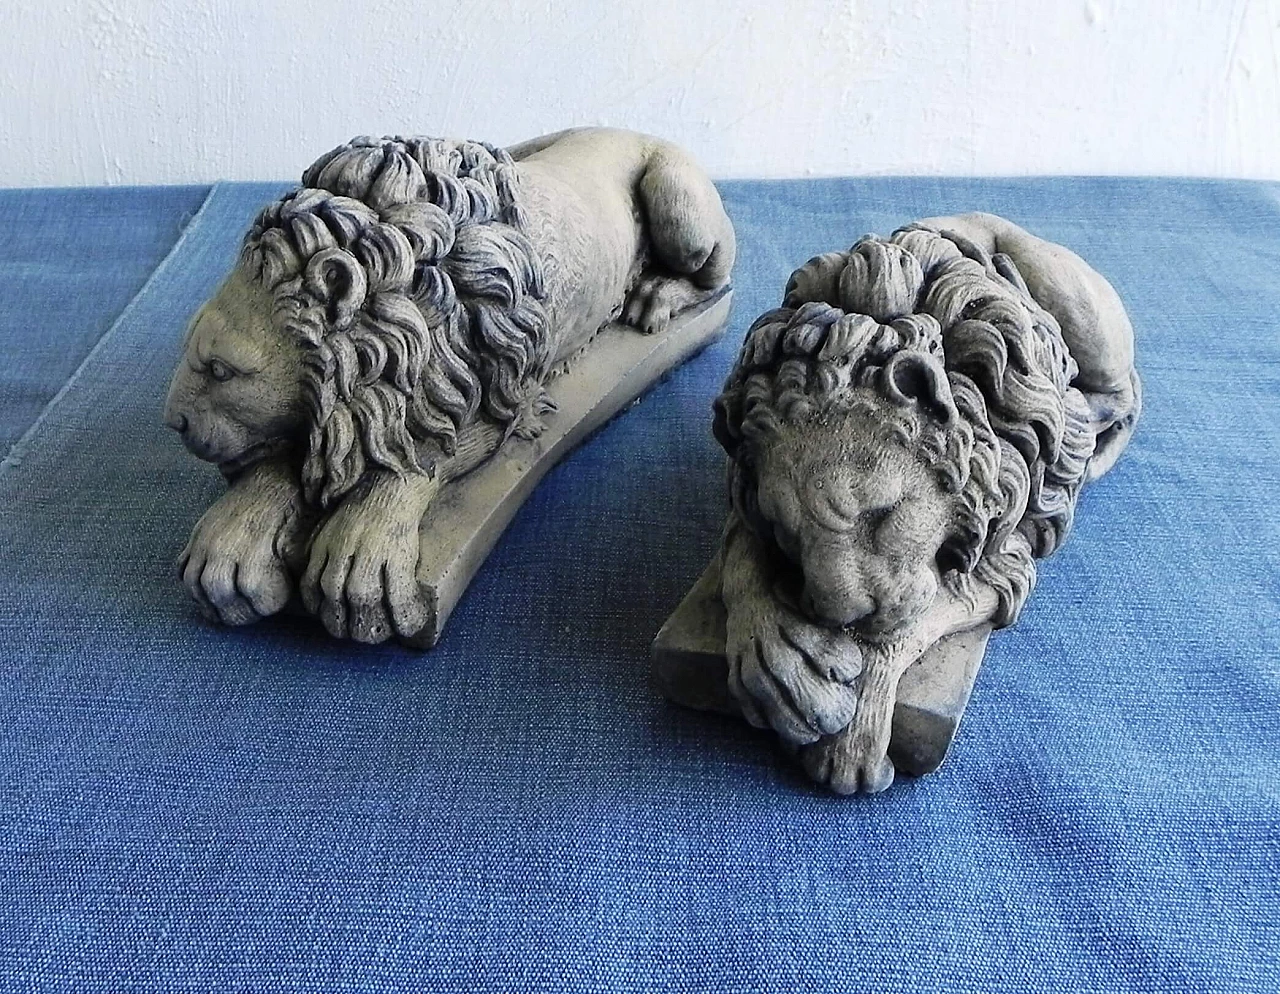 Pair of stone sculptures of sleeping lions 17